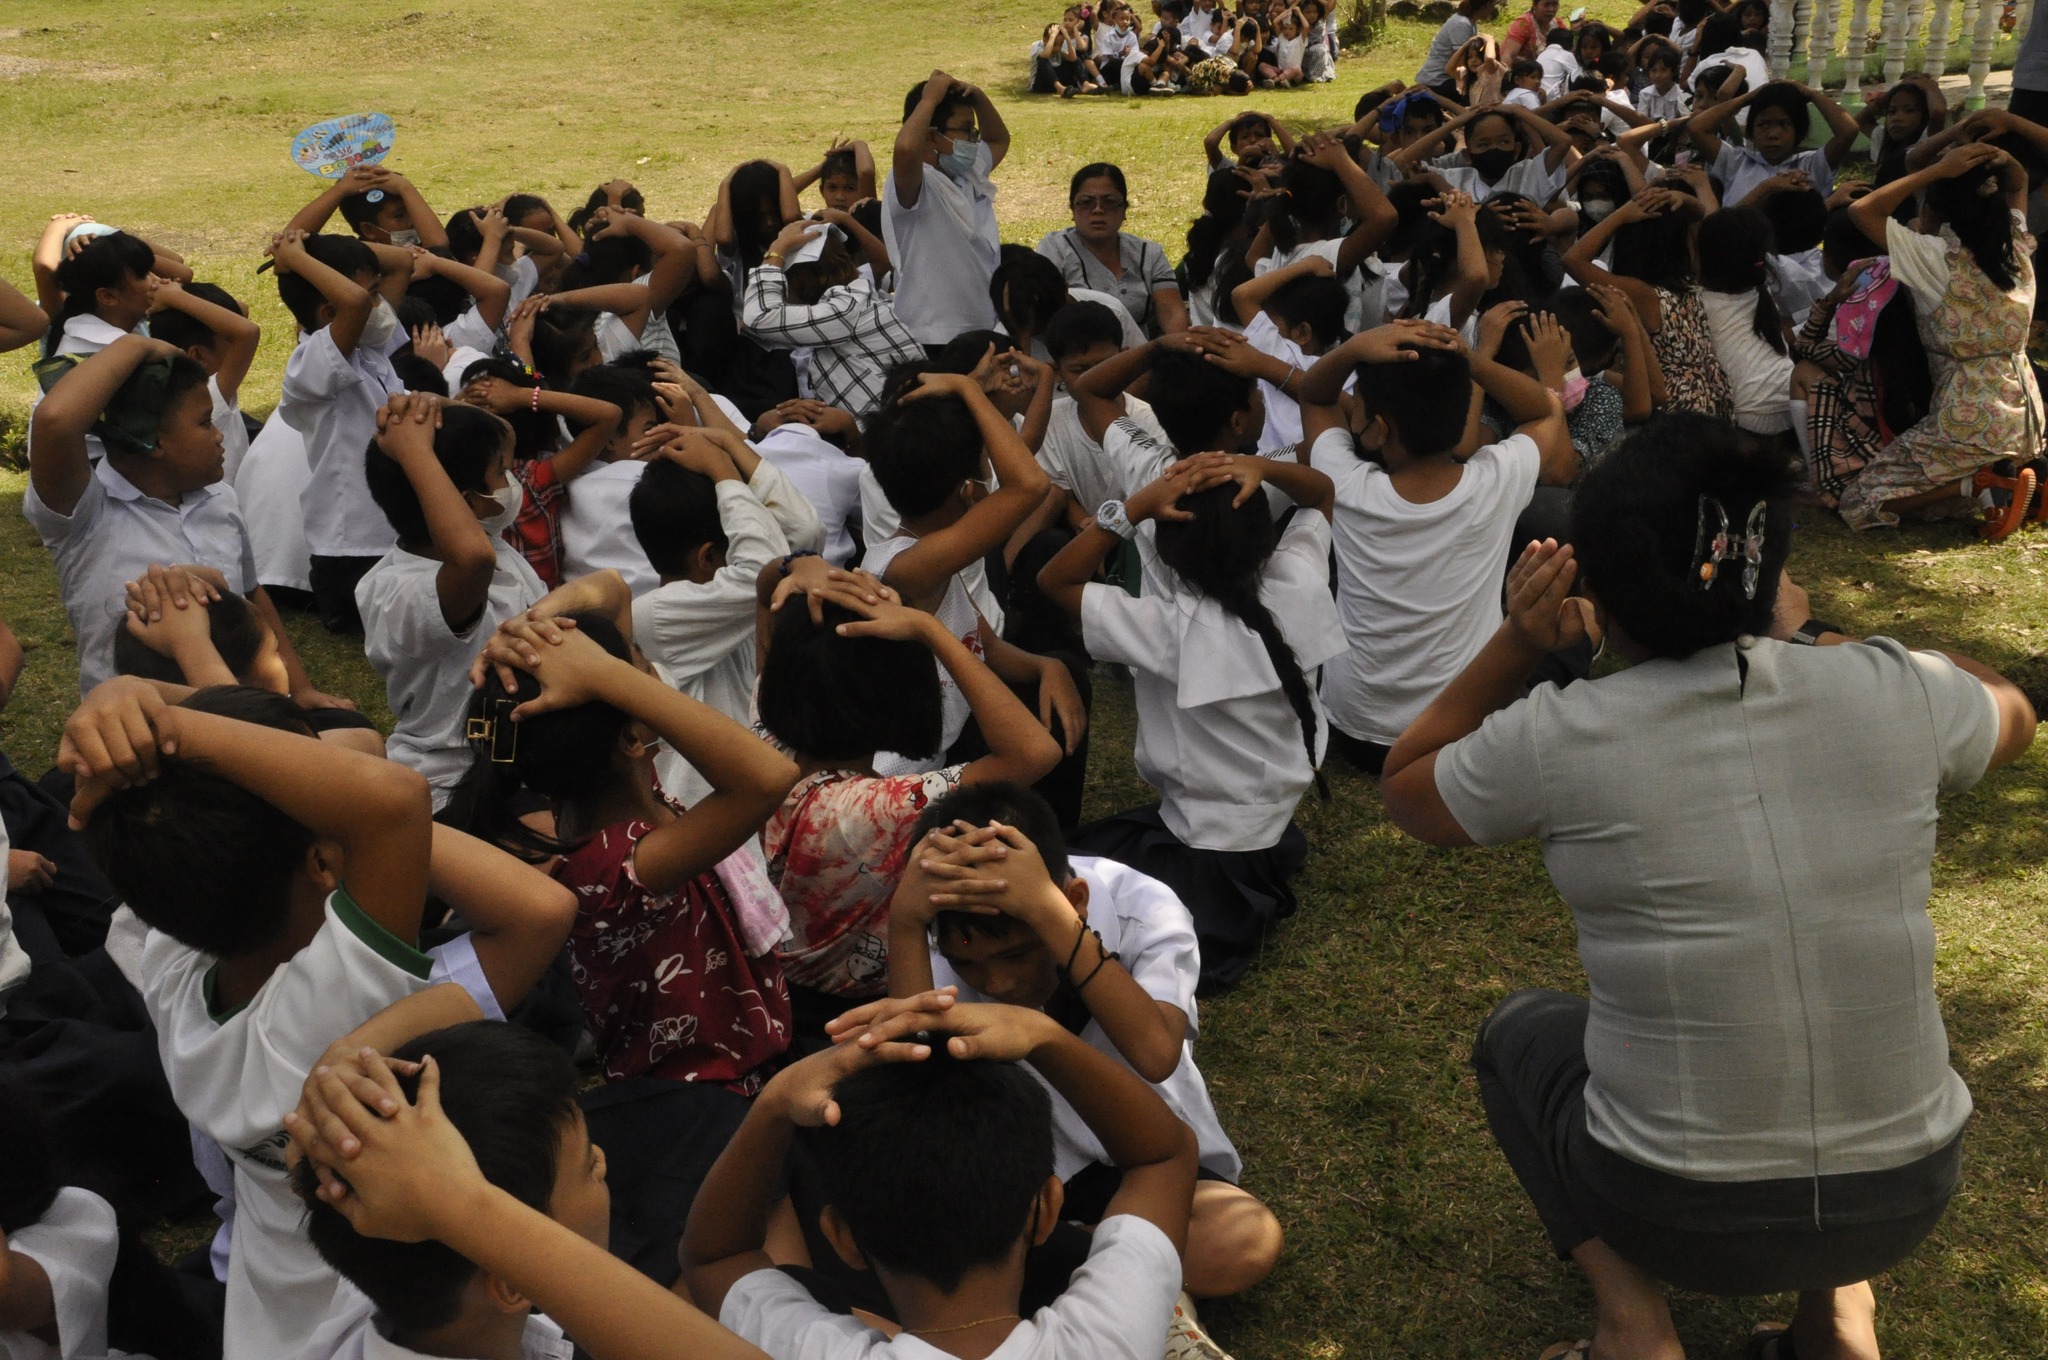 City East passes quake  drill with flying colors